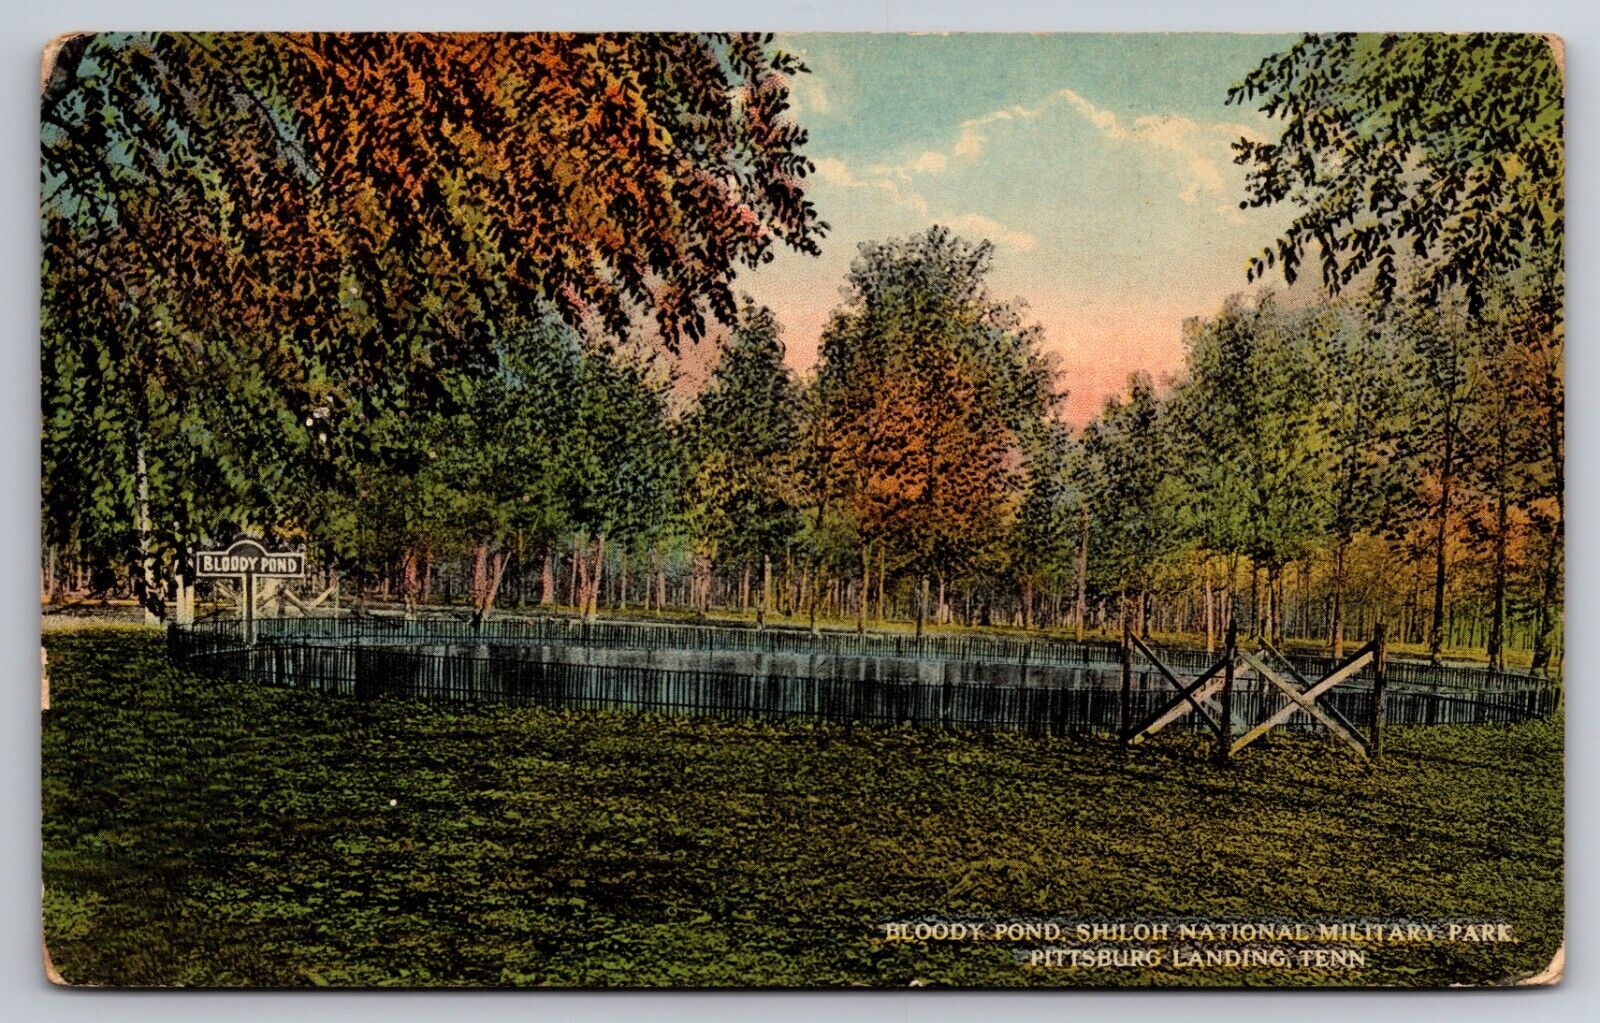 Bloody Pond Shiloh National Military Park Pittsburg Landing Tennessee c1910